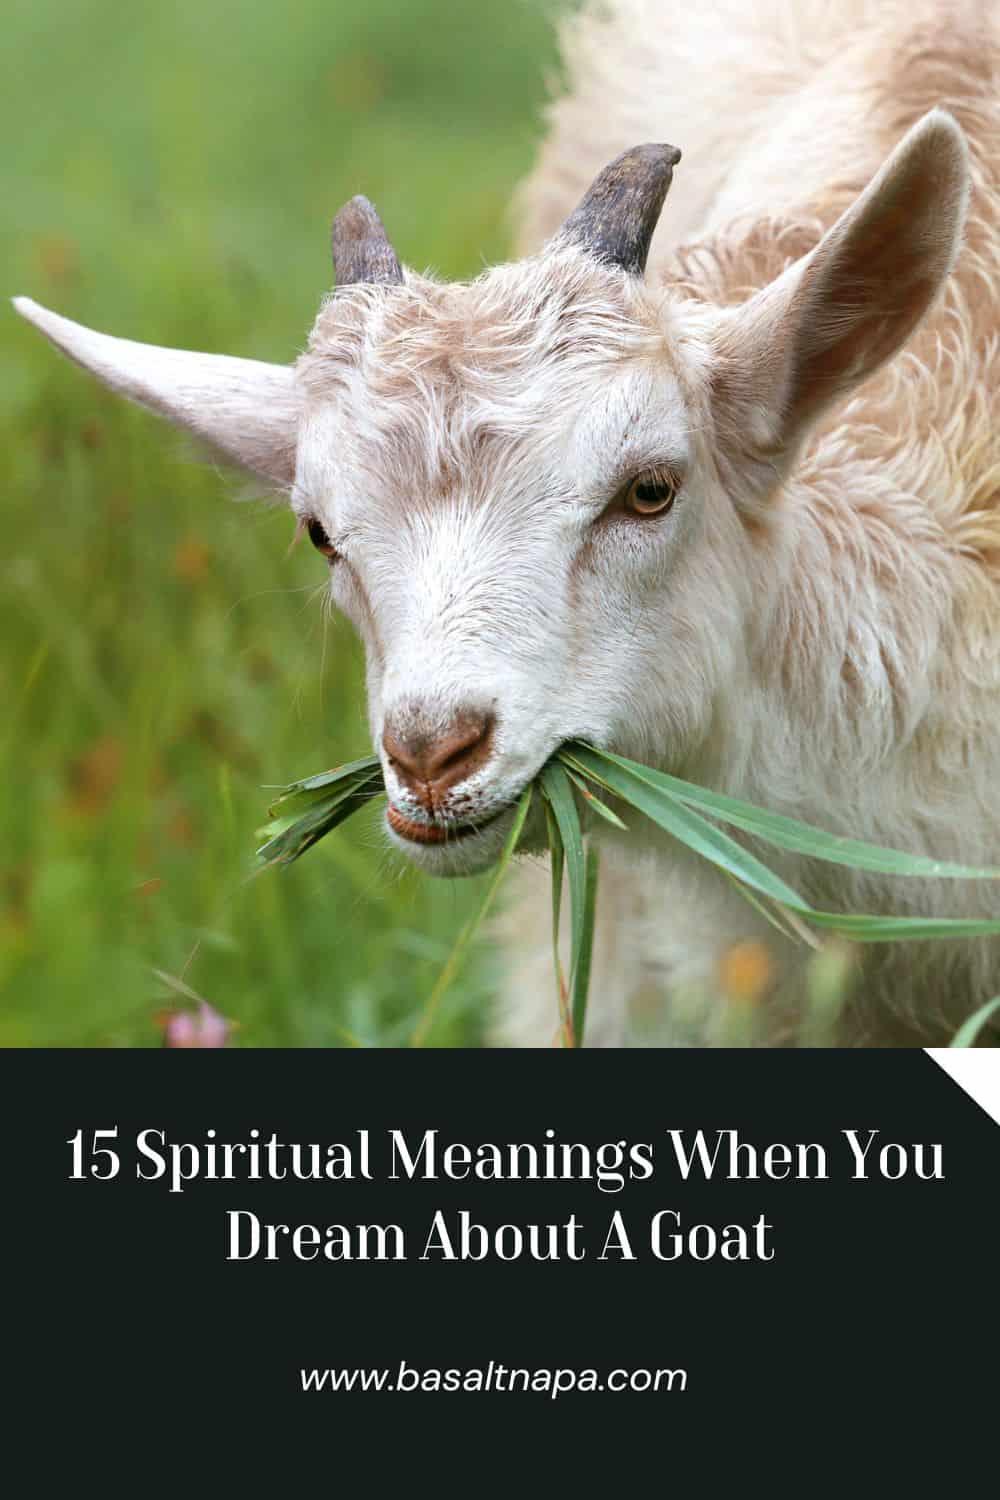 15 Spiritual Meanings When You Dream About A Goat